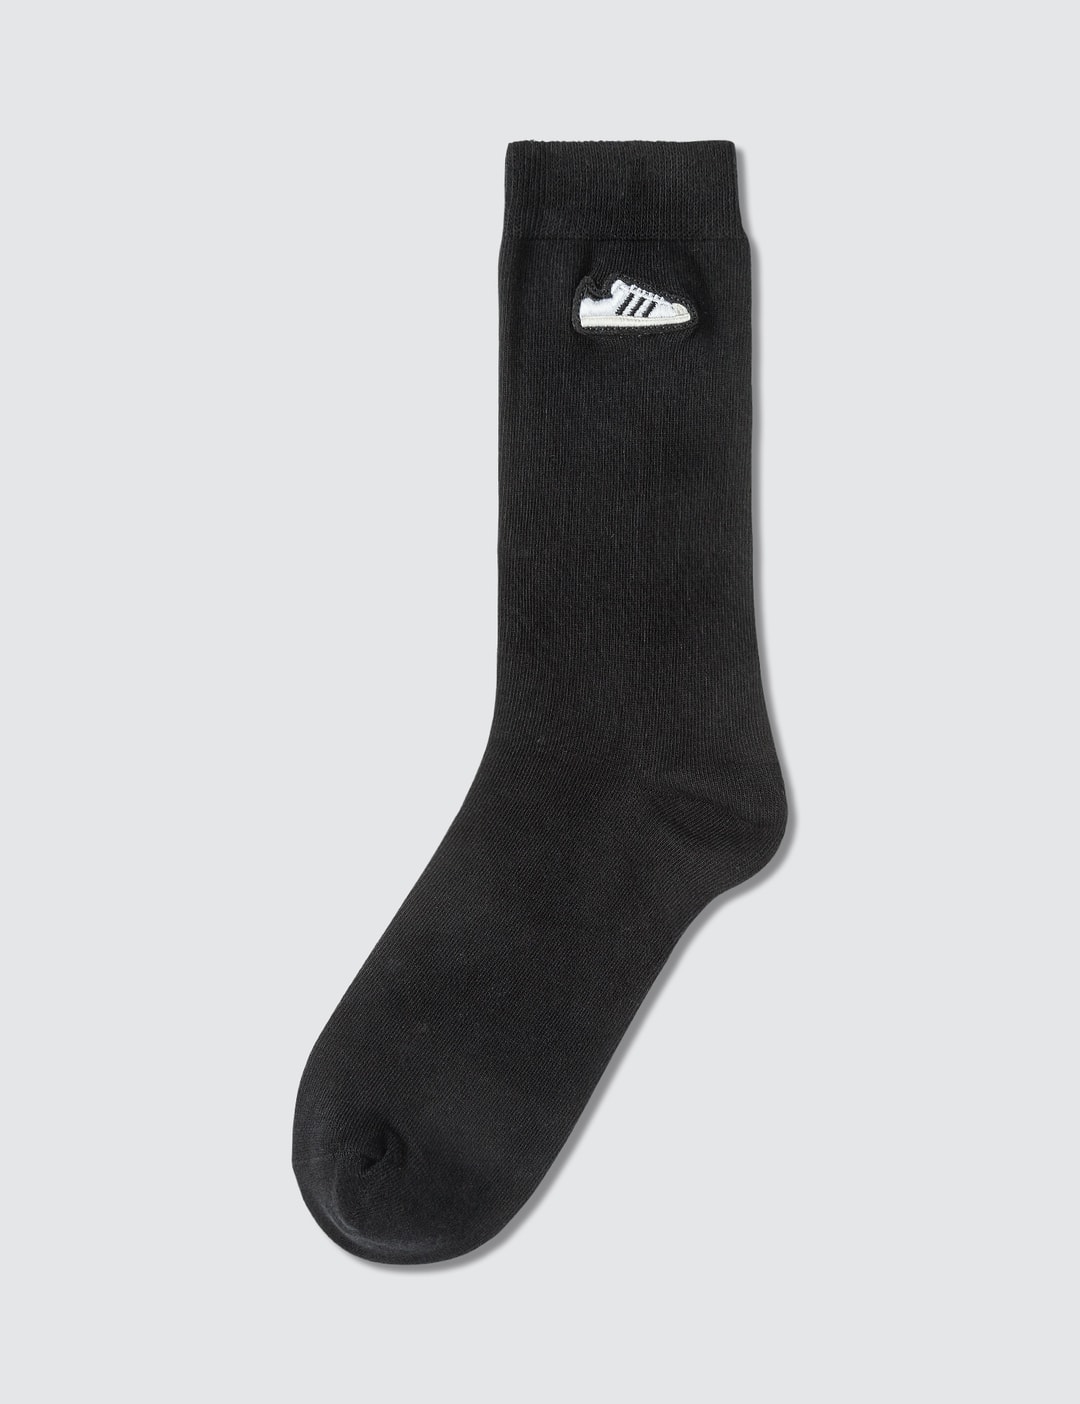 Adidas Originals - SST Socks | HBX - Globally Curated Fashion and ...